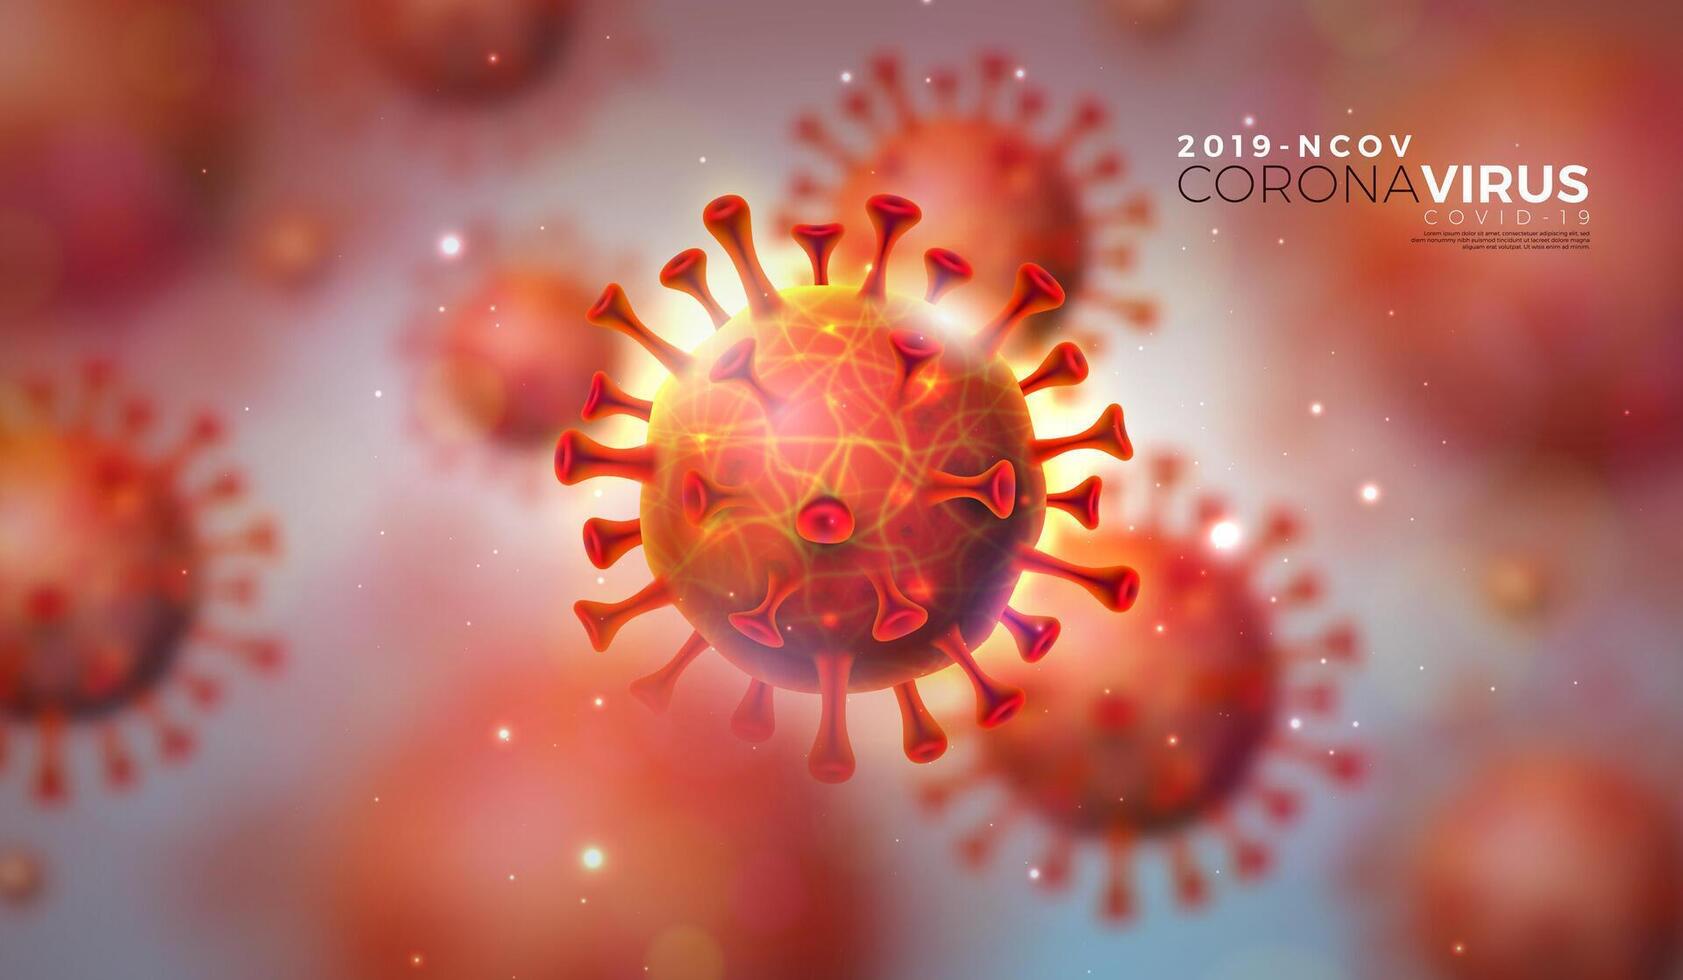 Covid-19. Coronavirus Outbreak Design with Virus Cell in Microscopic View on Shiny Light Background. Vector 2019-ncov Illustration Template on Dangerous SARS Epidemic Theme for Promotional Banner.